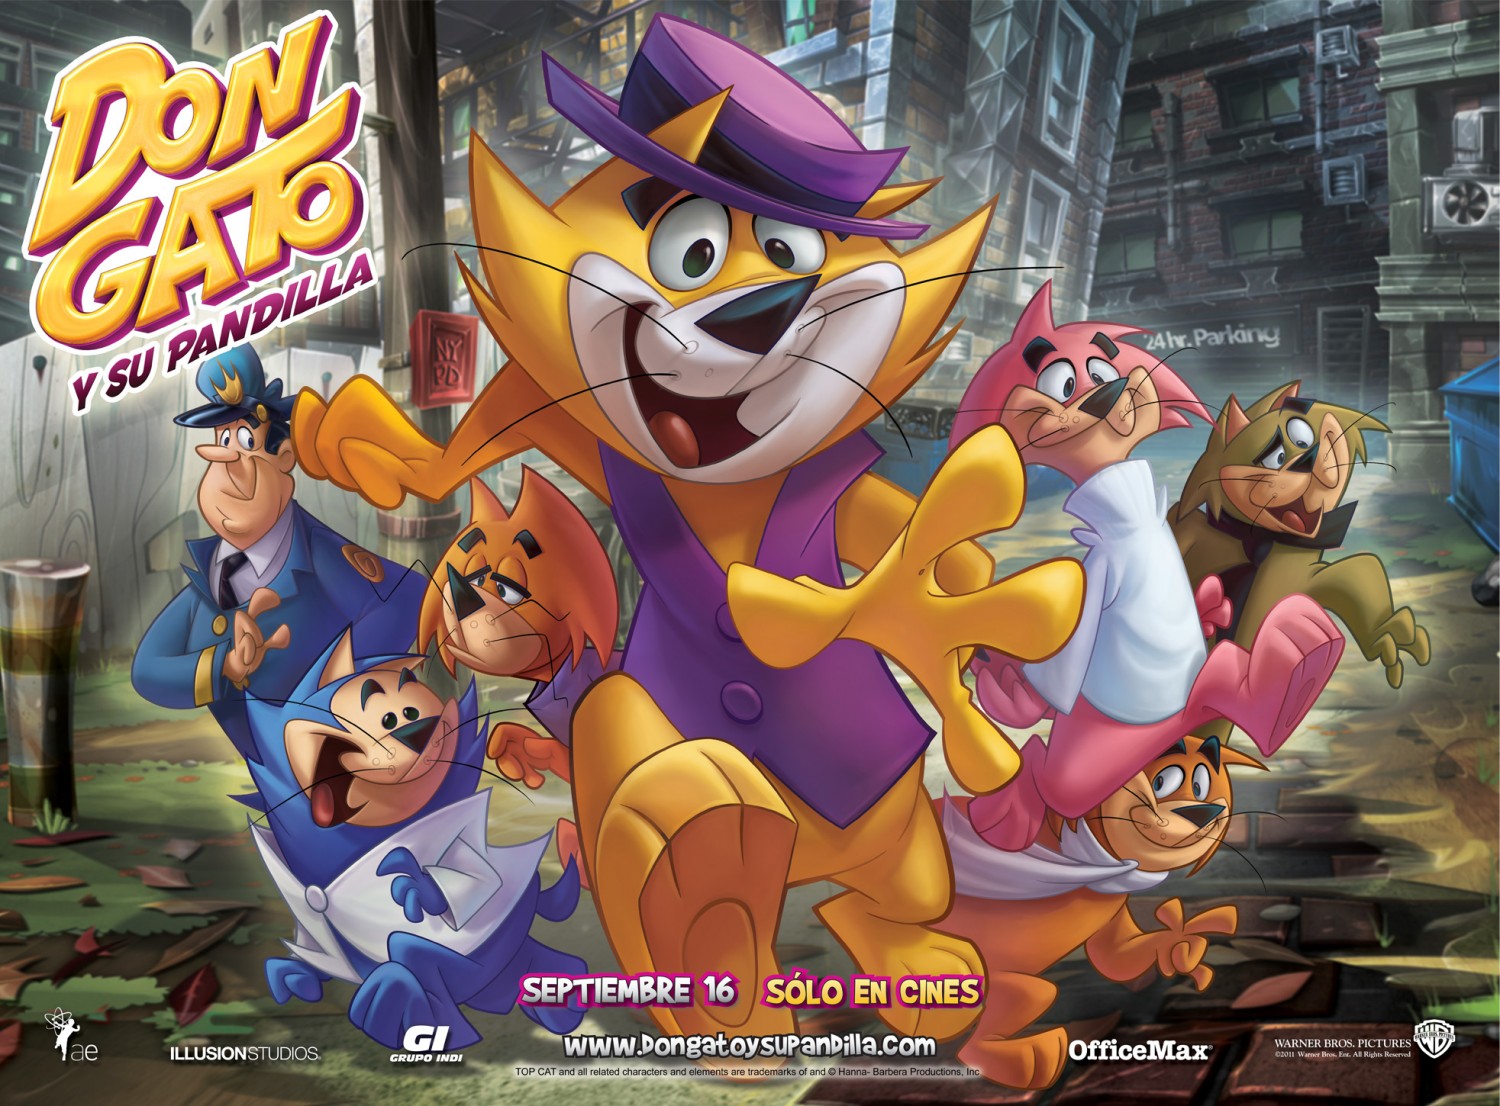 Extra Large Movie Poster Image for Don Gato y su pandilla (#9 of 12)